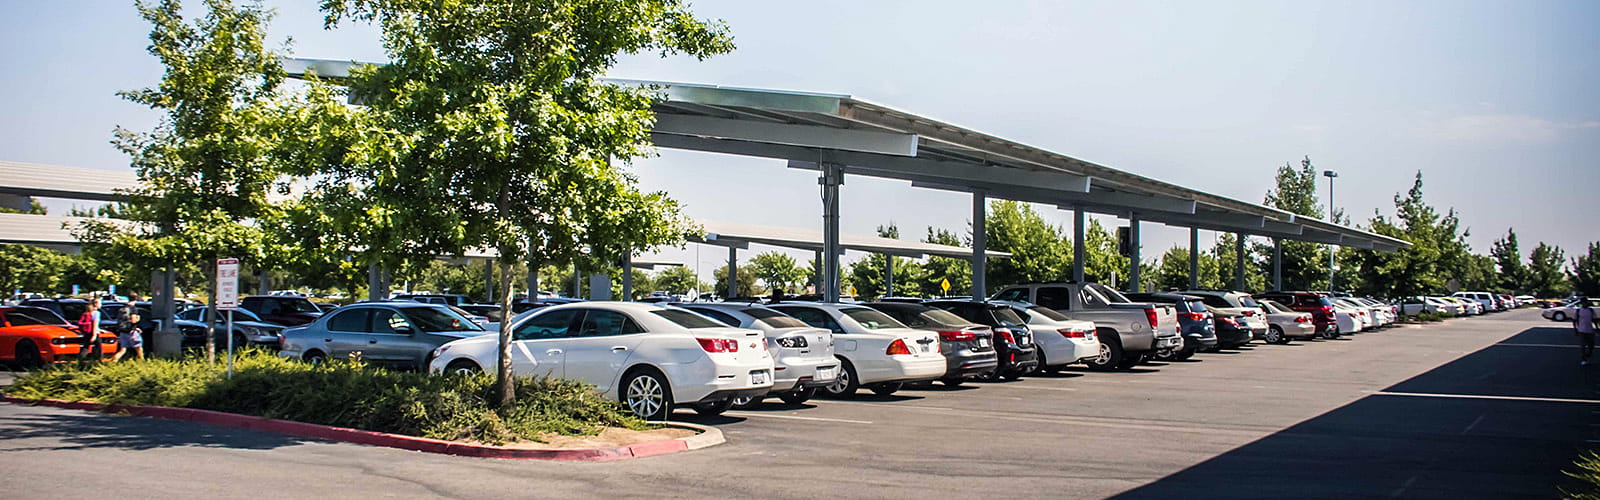 Parked cars at Clovis Community College campus